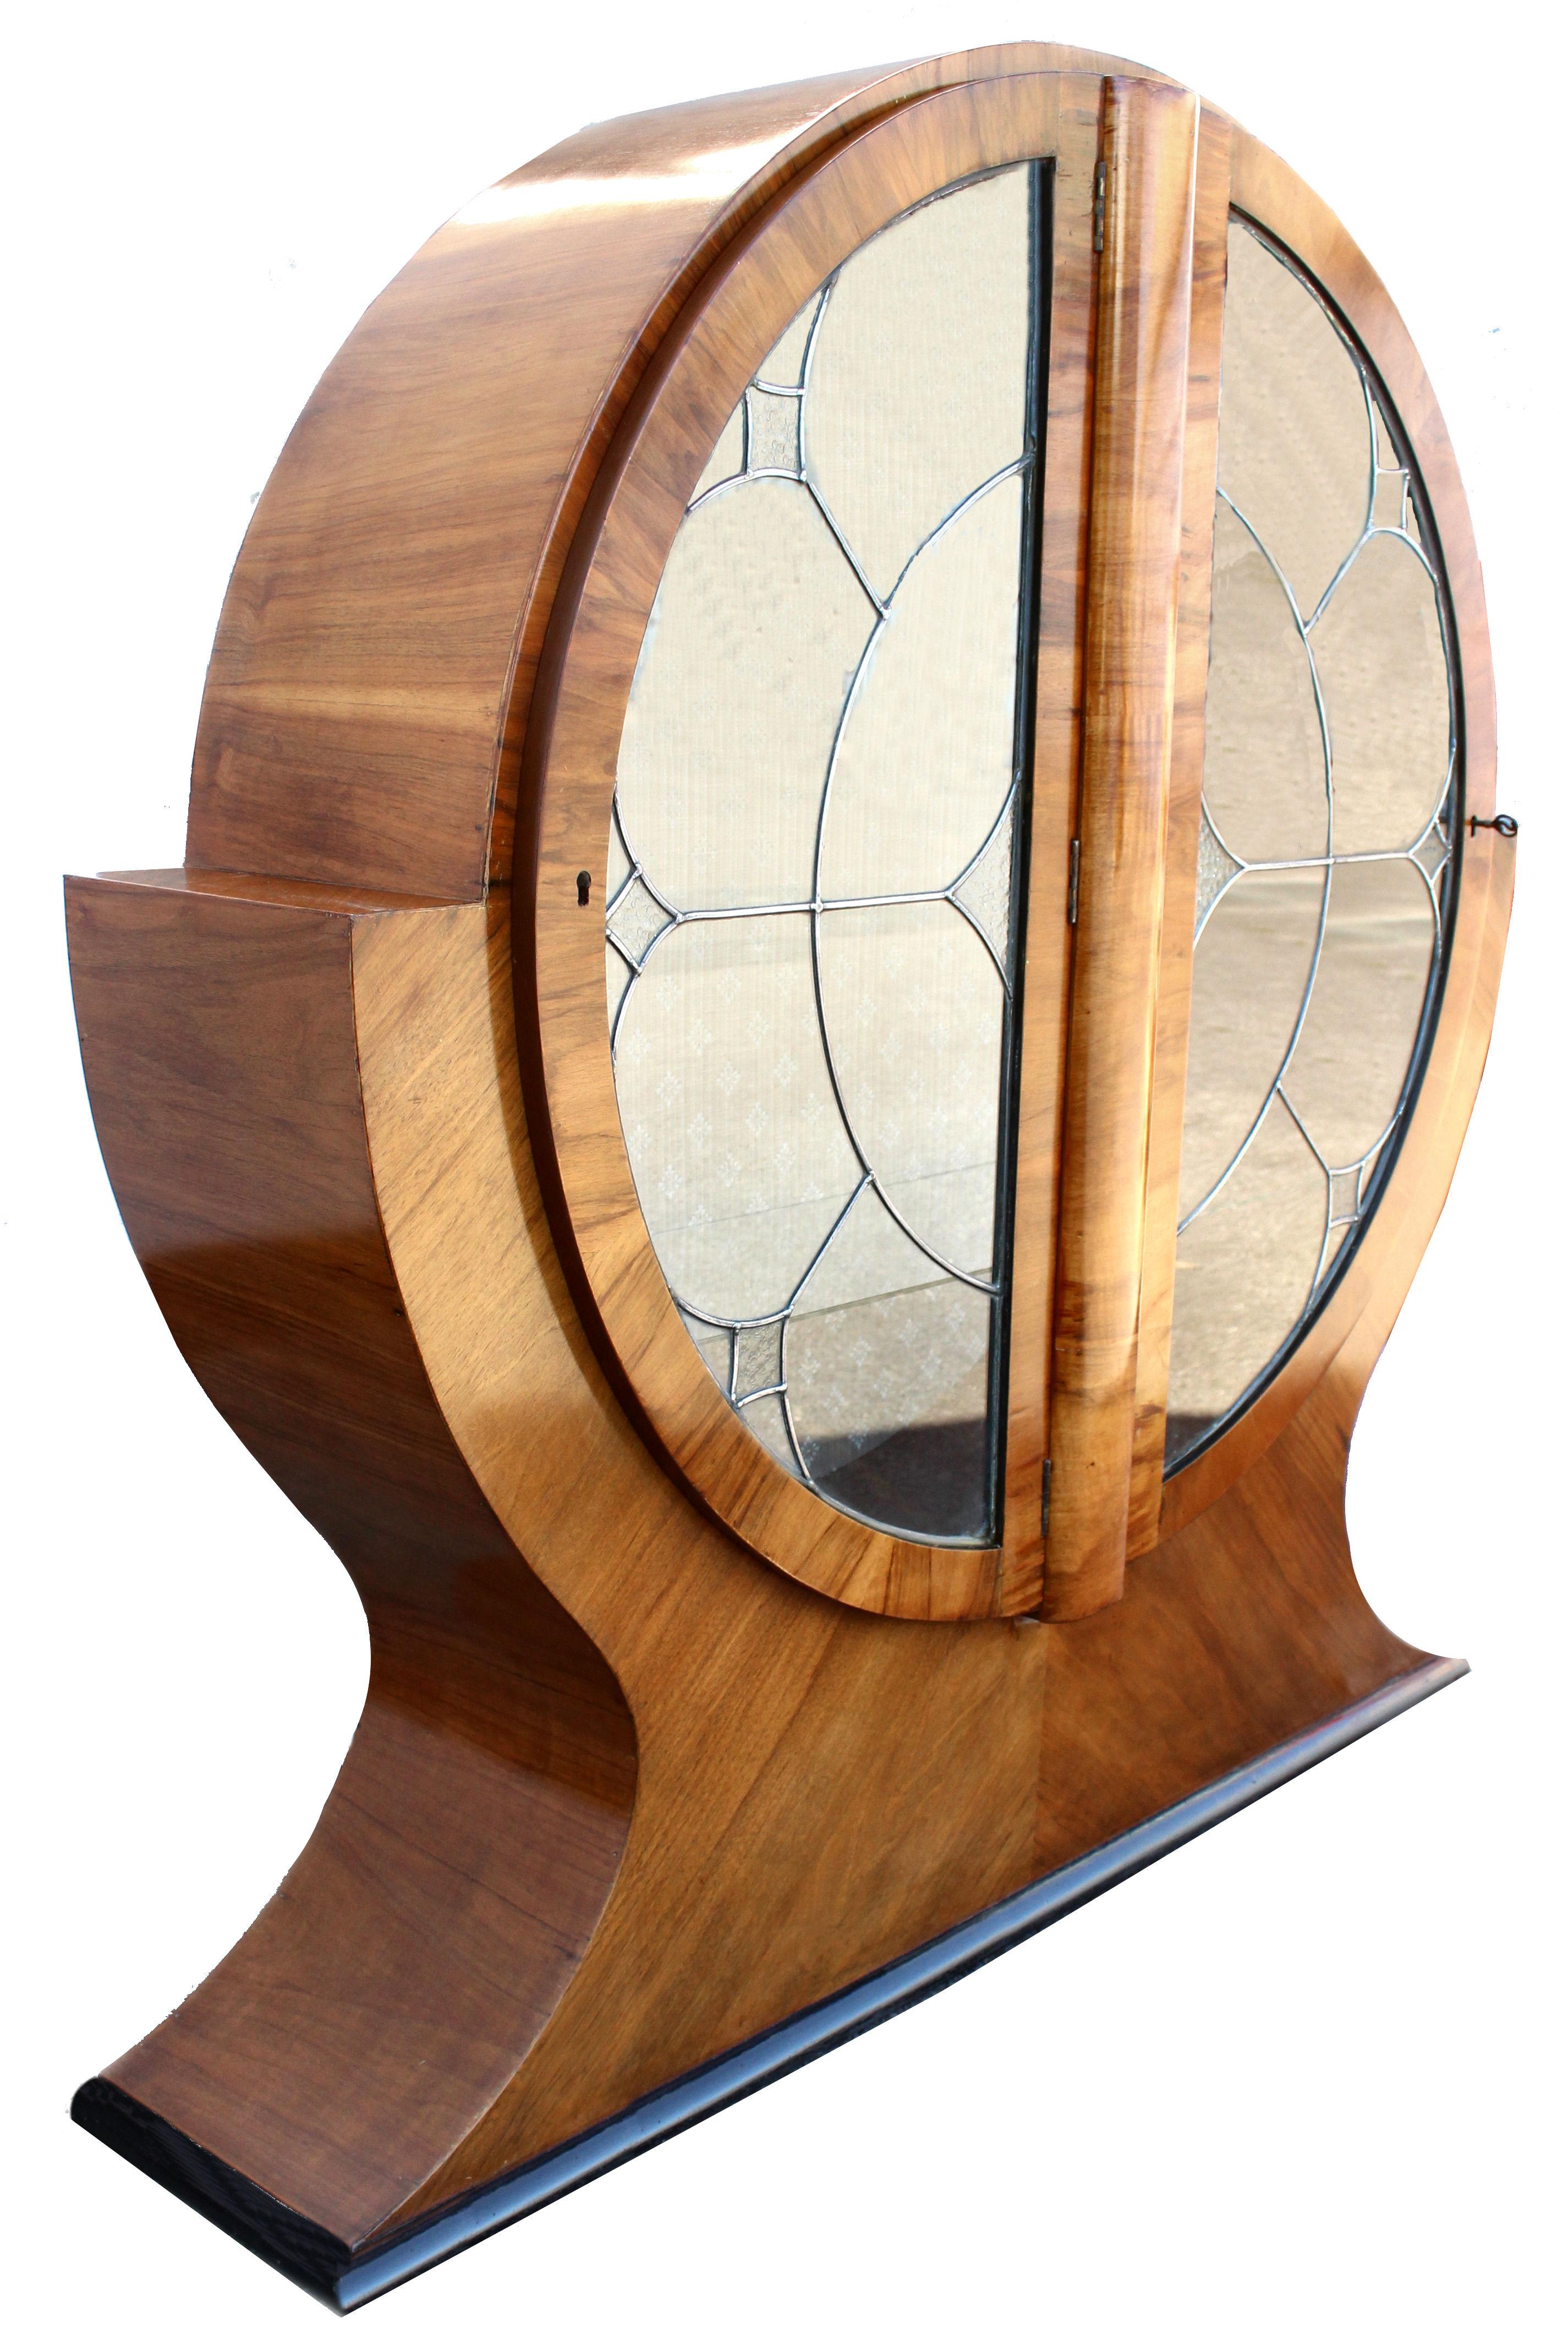 This is a superbly stylish 1930's Art Deco display cabinet. This walnut cabinet is what we've chosen to call a 